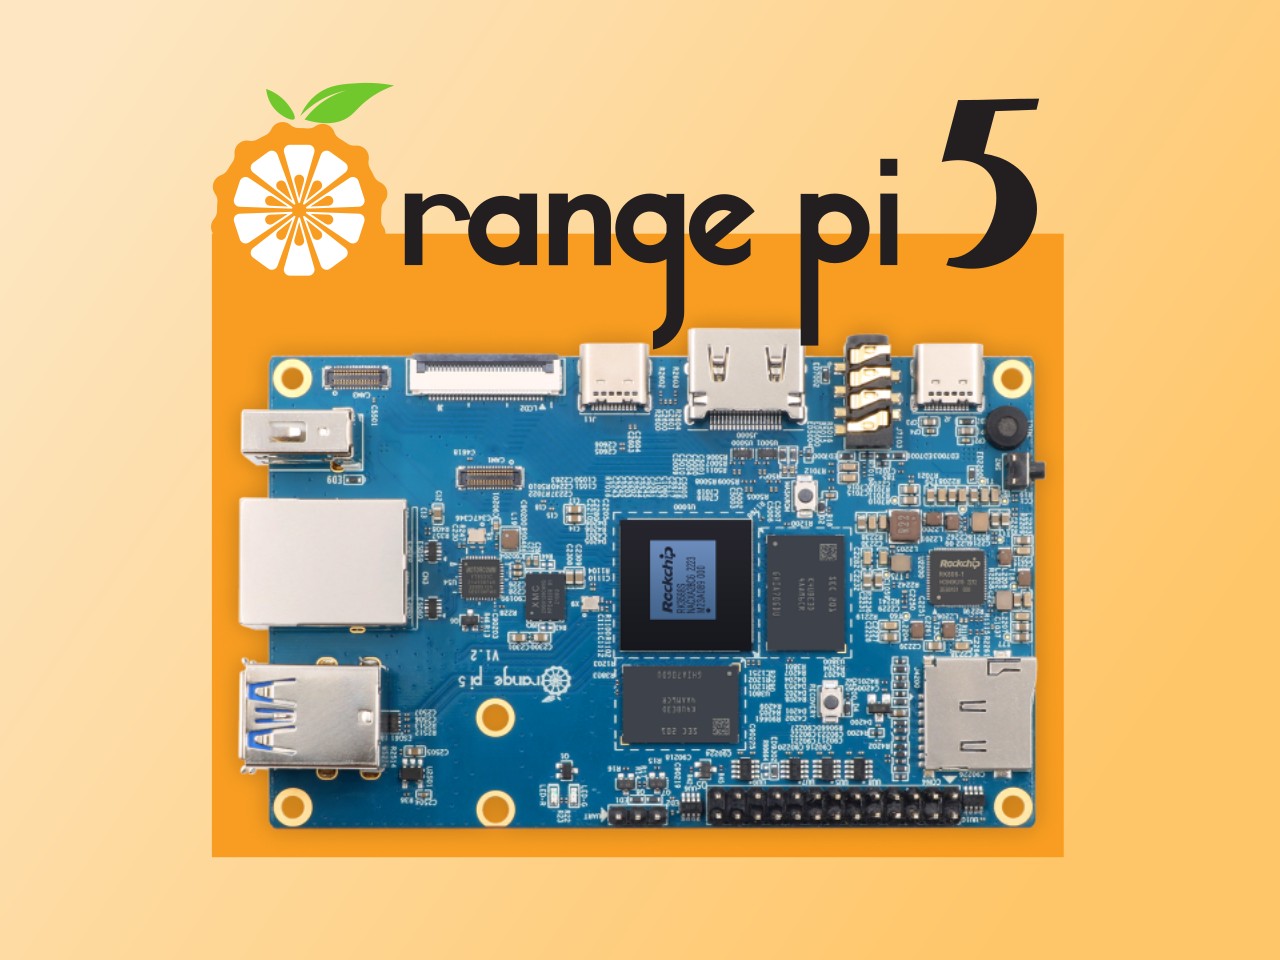 orange-pi-5-sbc-is-available-for-pre-order-prices-start-at-60